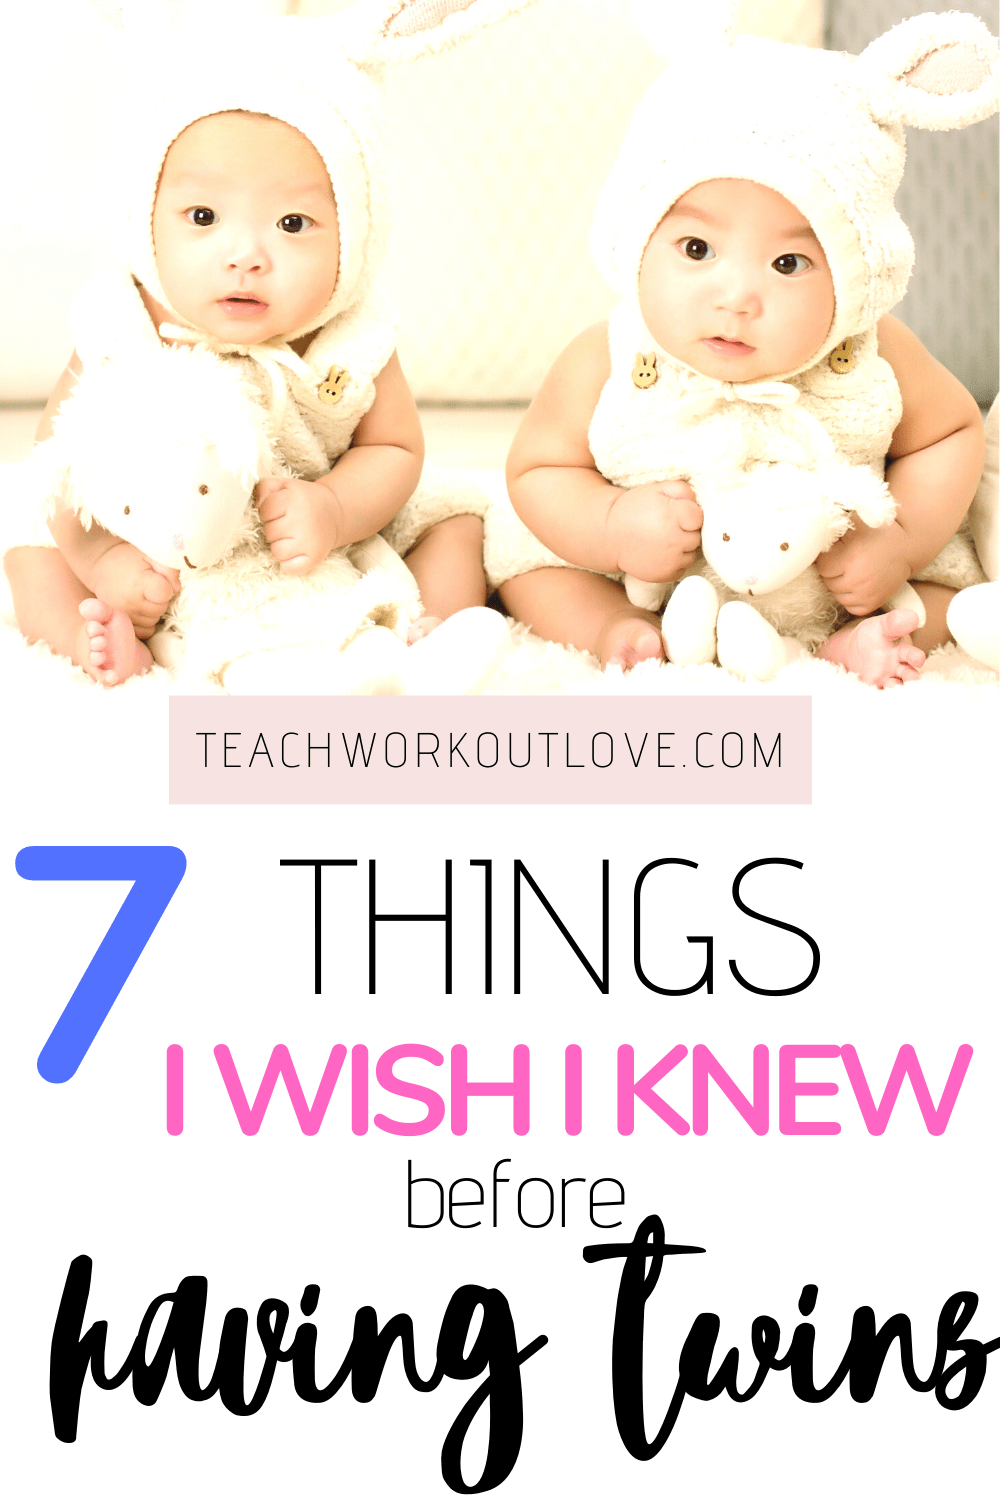 It’s really fascinating how two babies come into this world together. Read this article to learn what you should now before having twins.